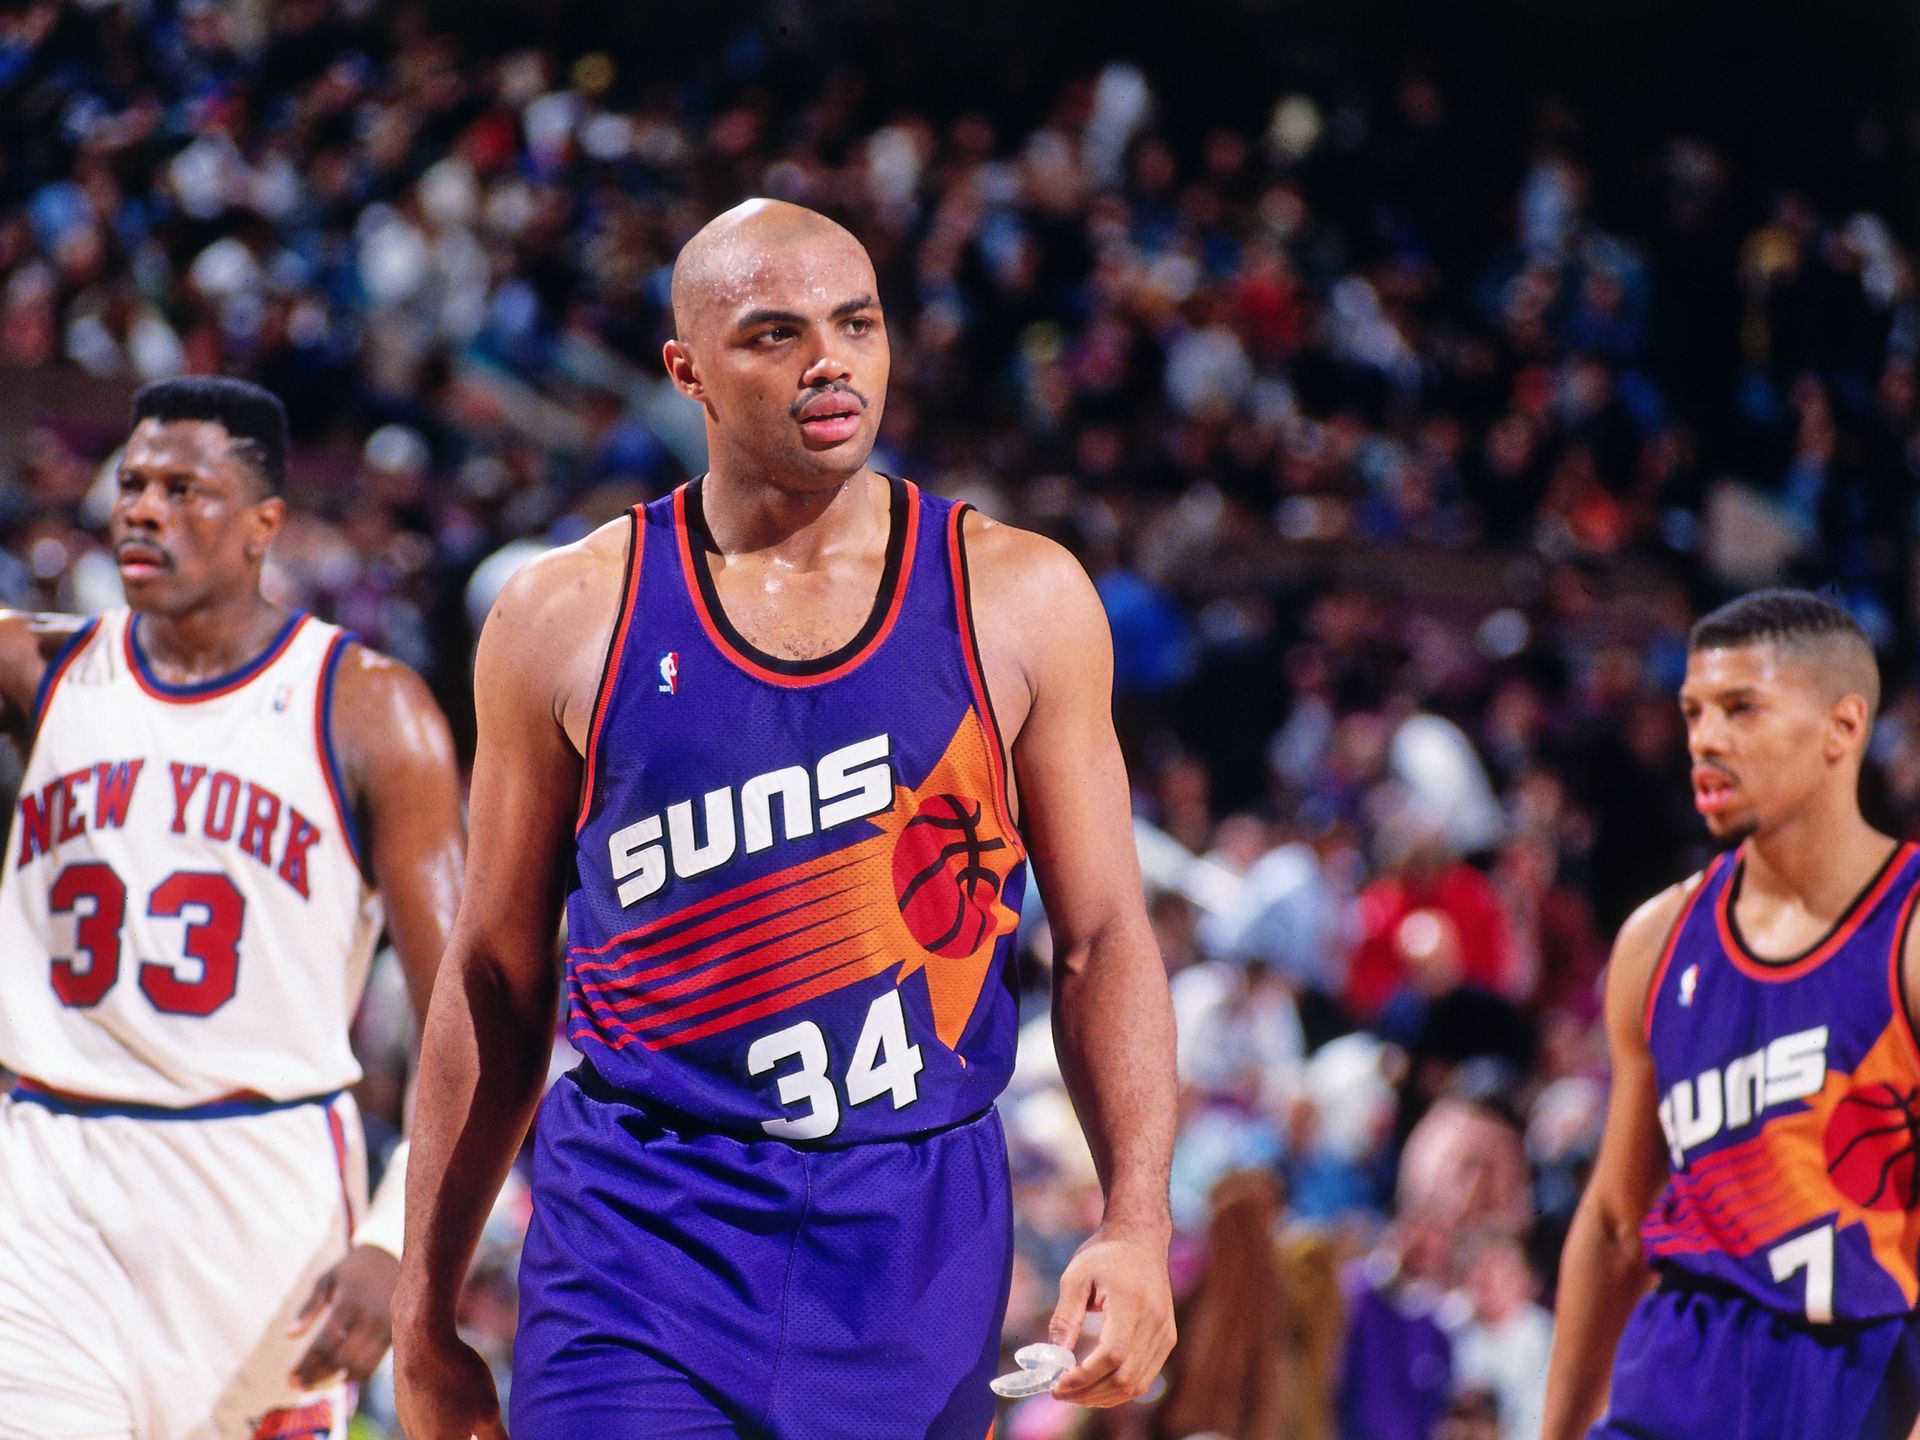 Suns to Debut Back in Black Retro Jerseys